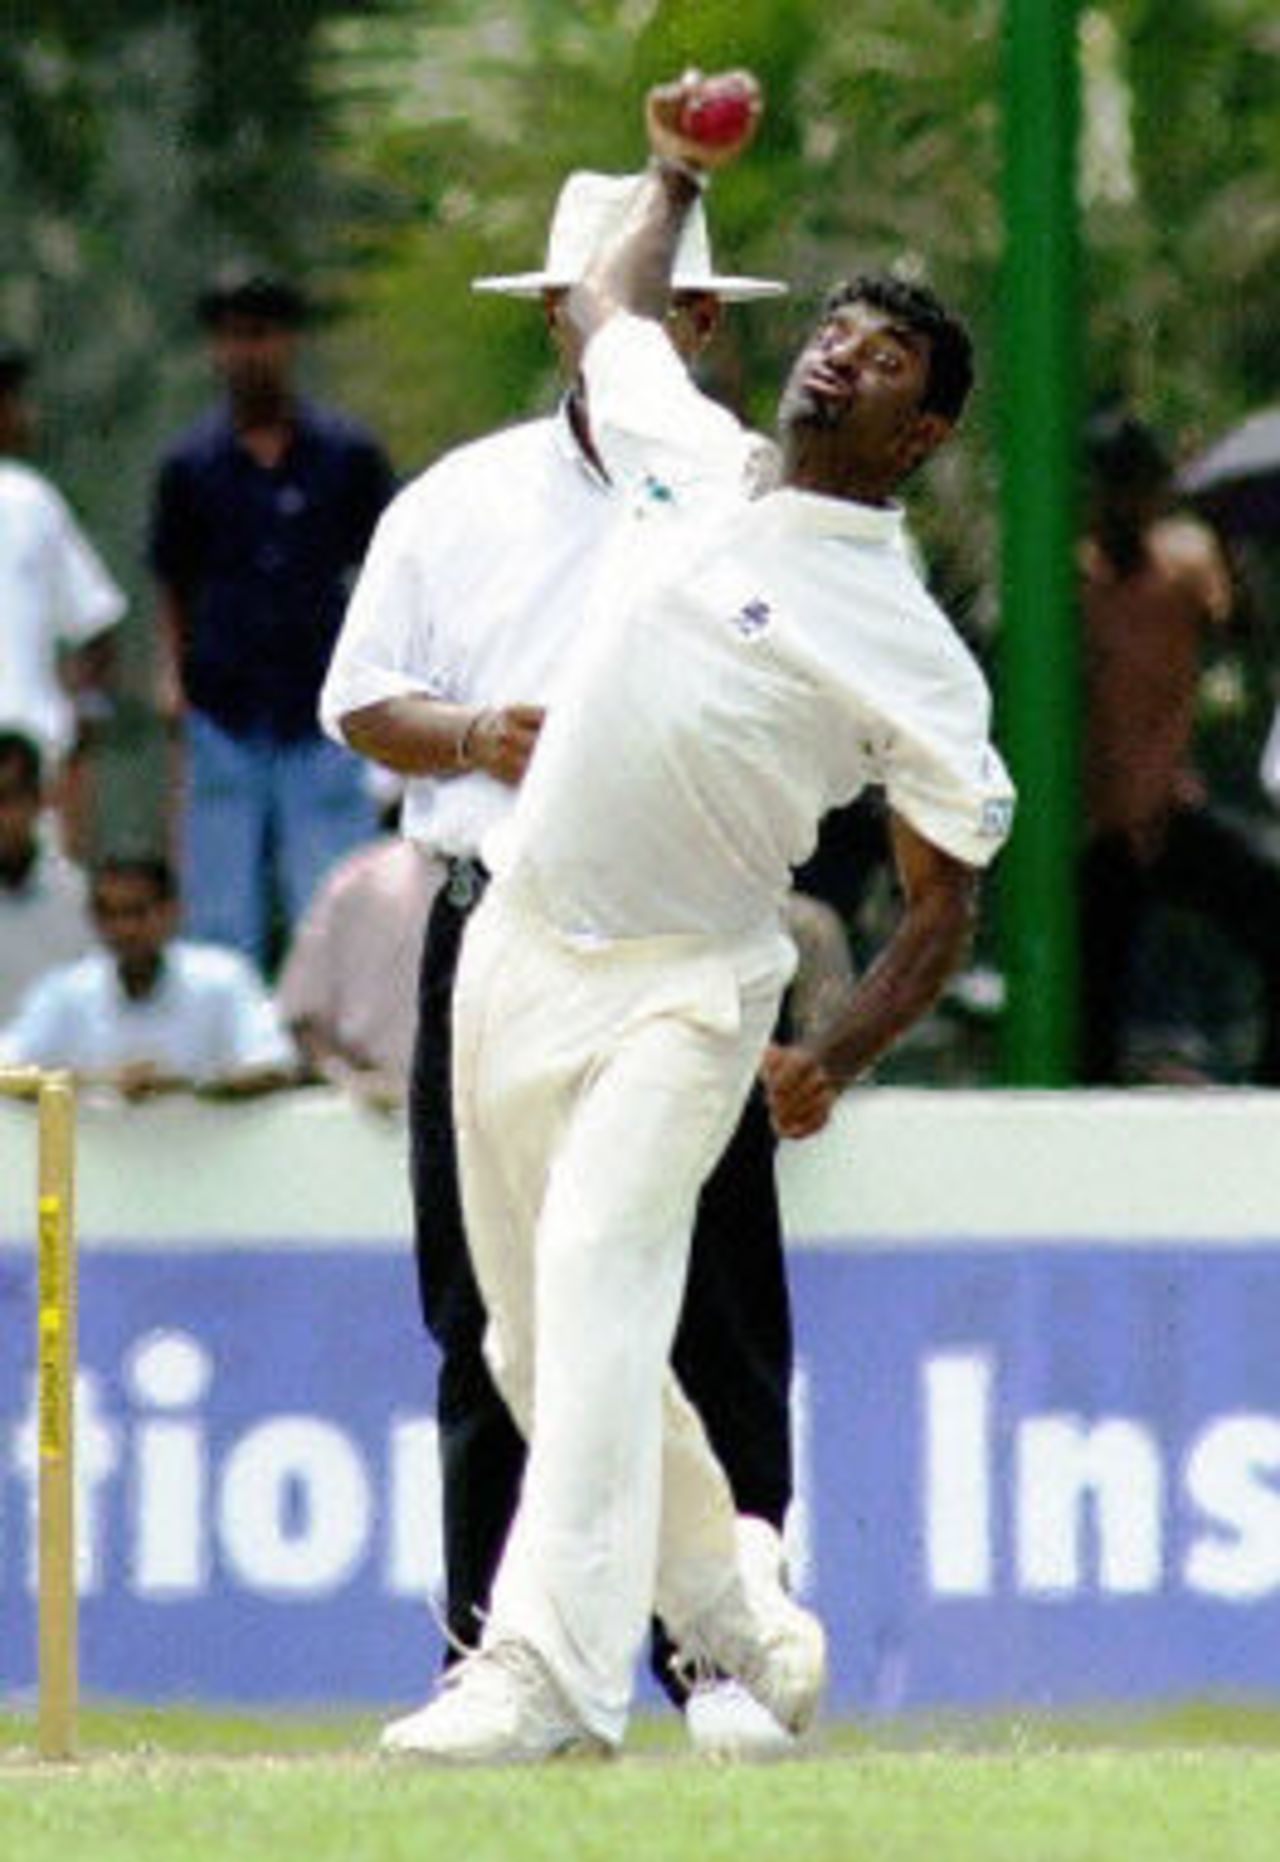 Muttiah Muralidharan delivers a ball during the final day of the first cricket test match between Sri Lanka and West Indies